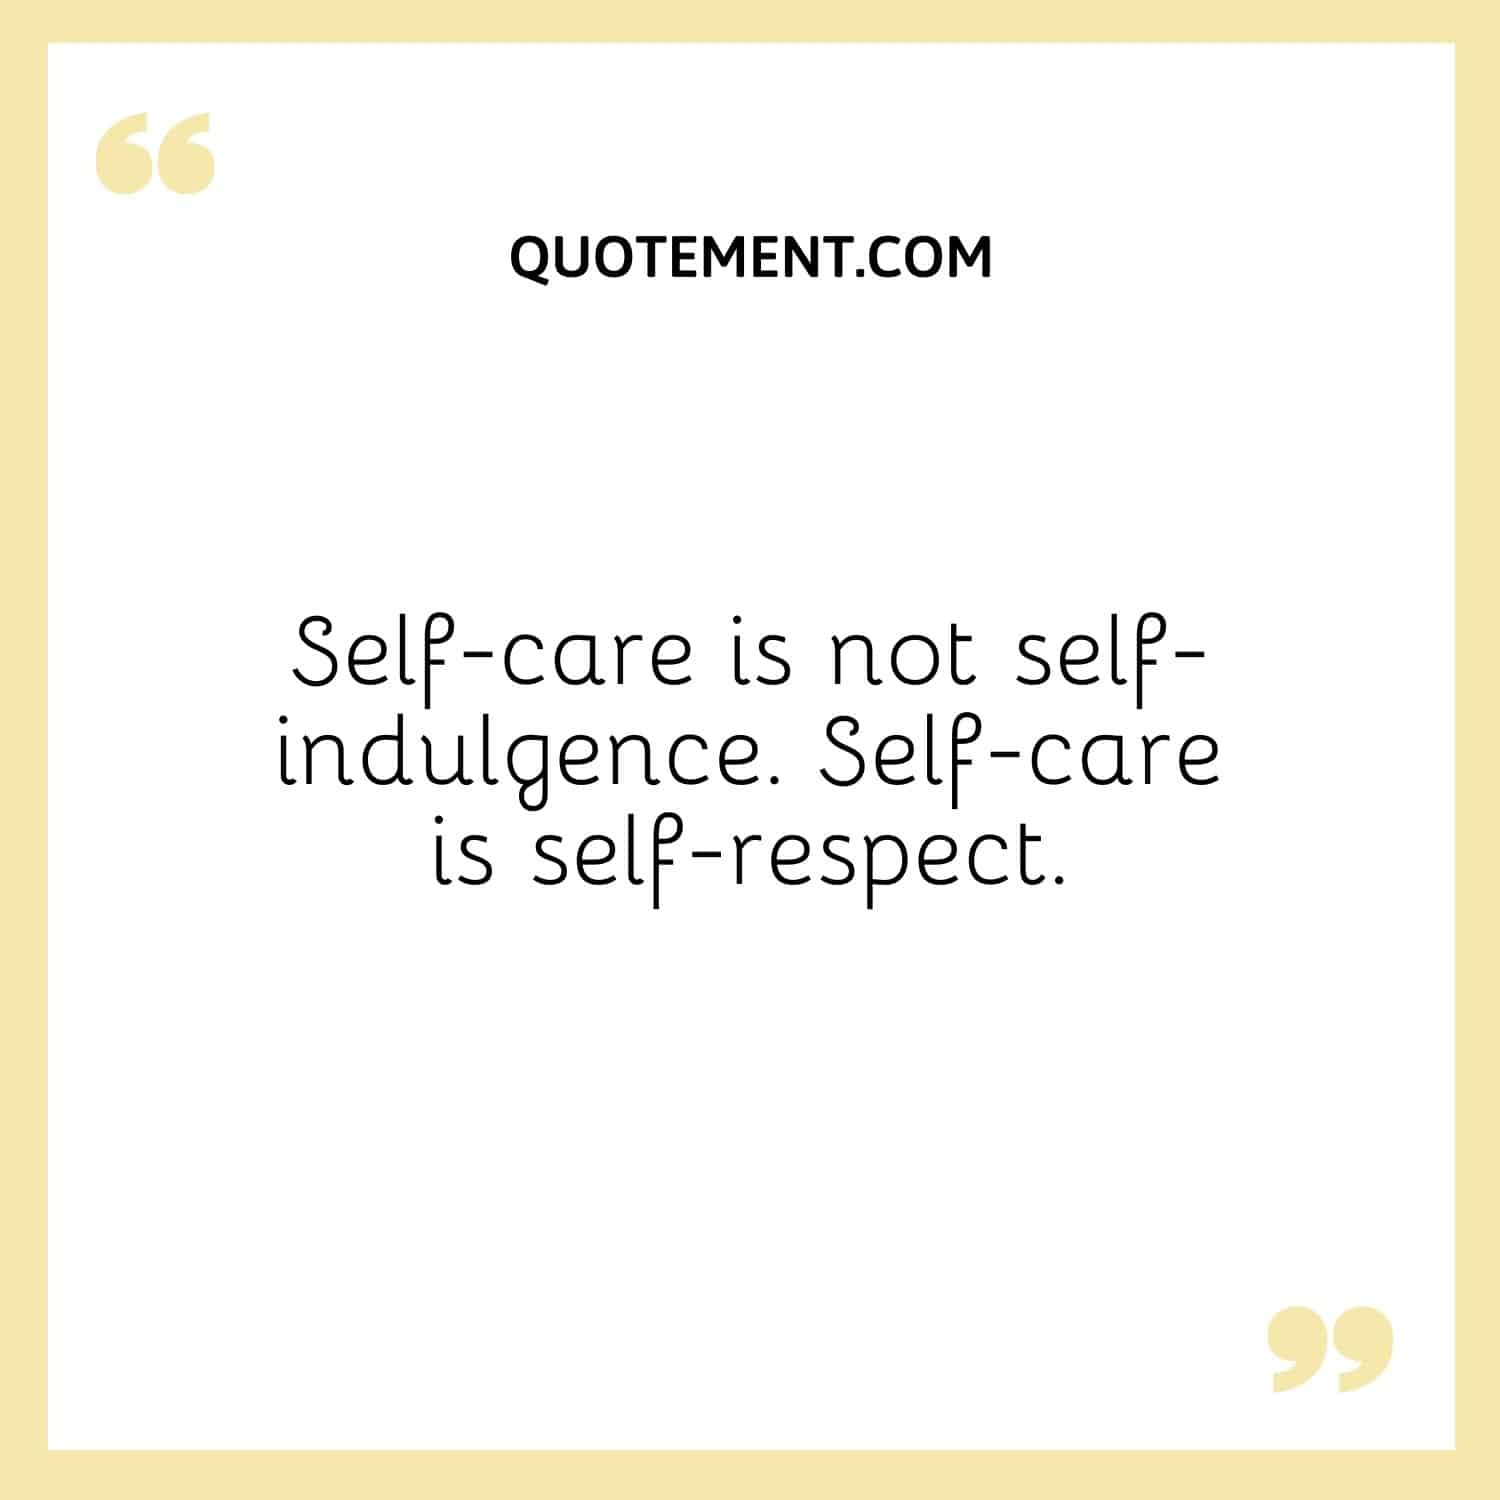 Self-care is self-respect